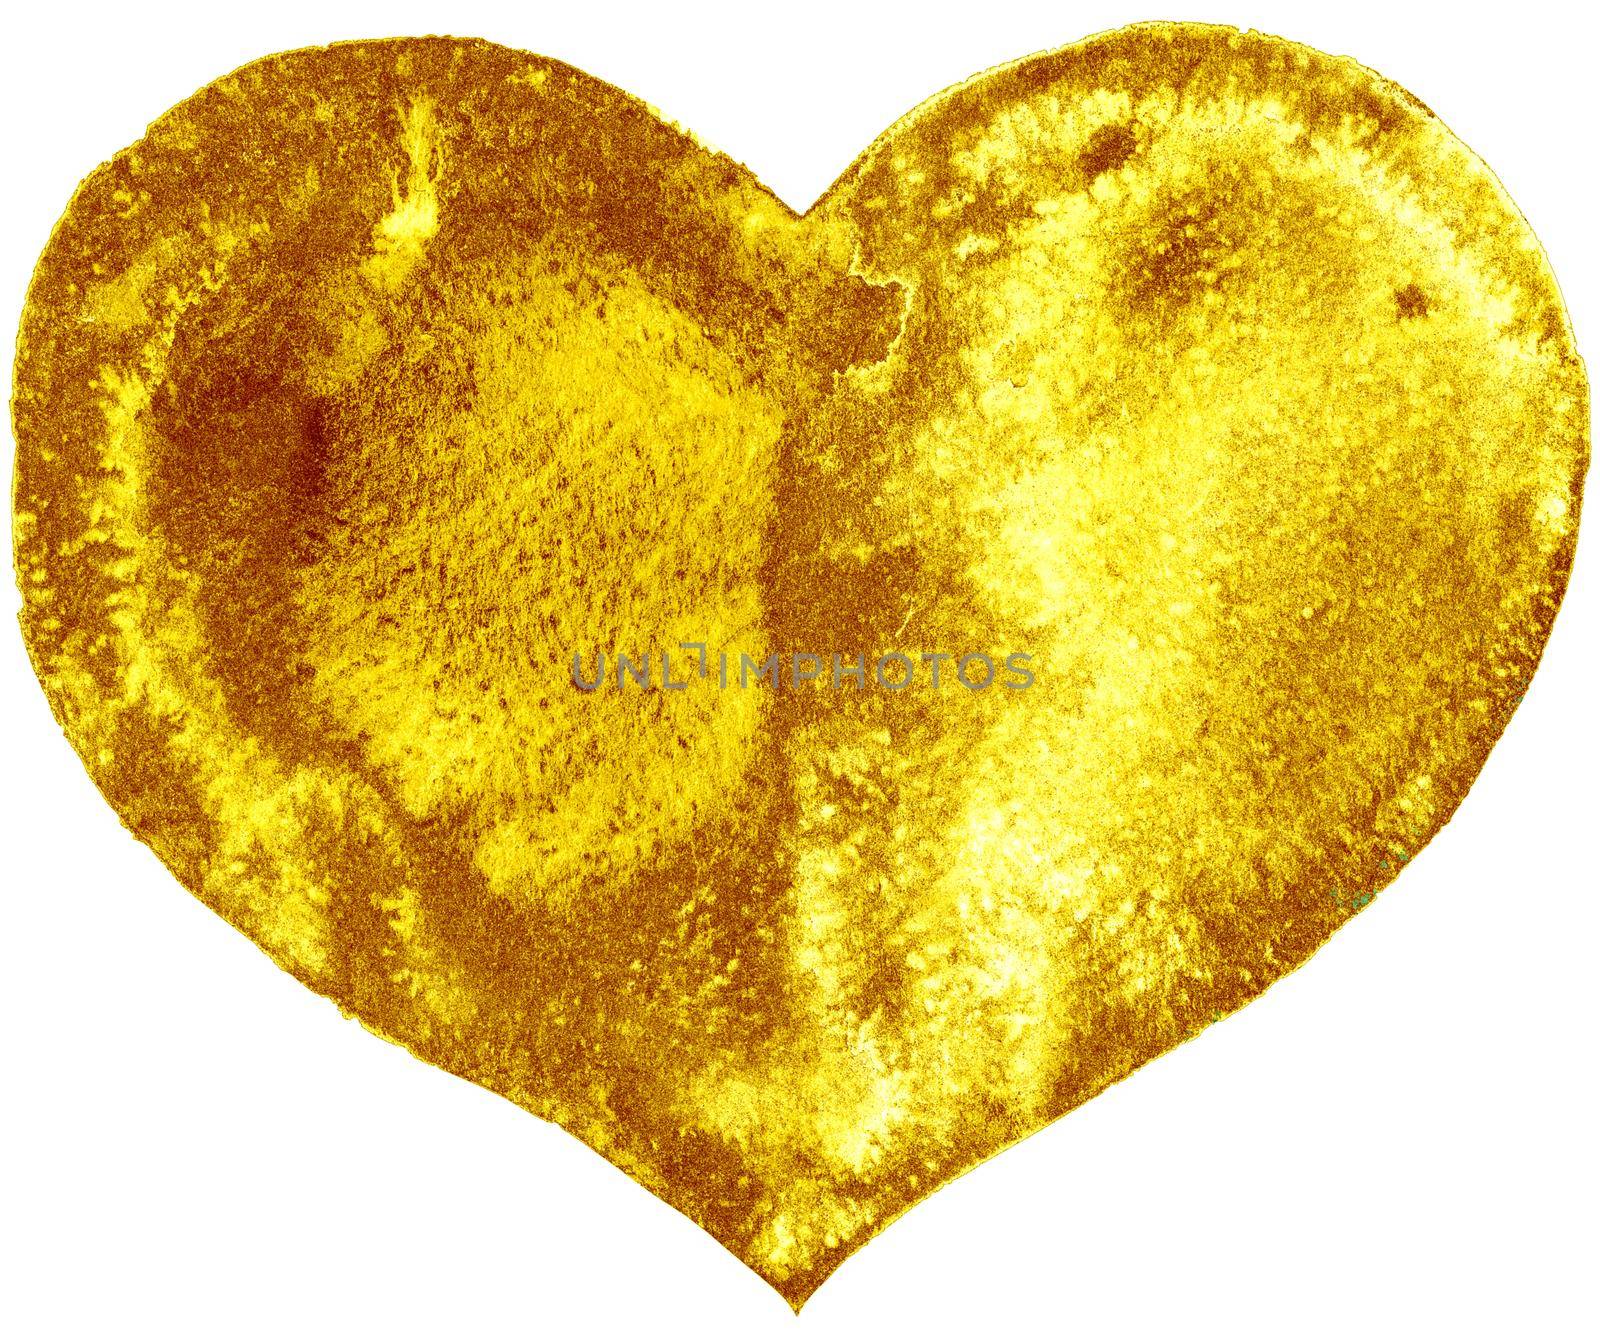 Watercolor textured gold heart on white background by NataOmsk